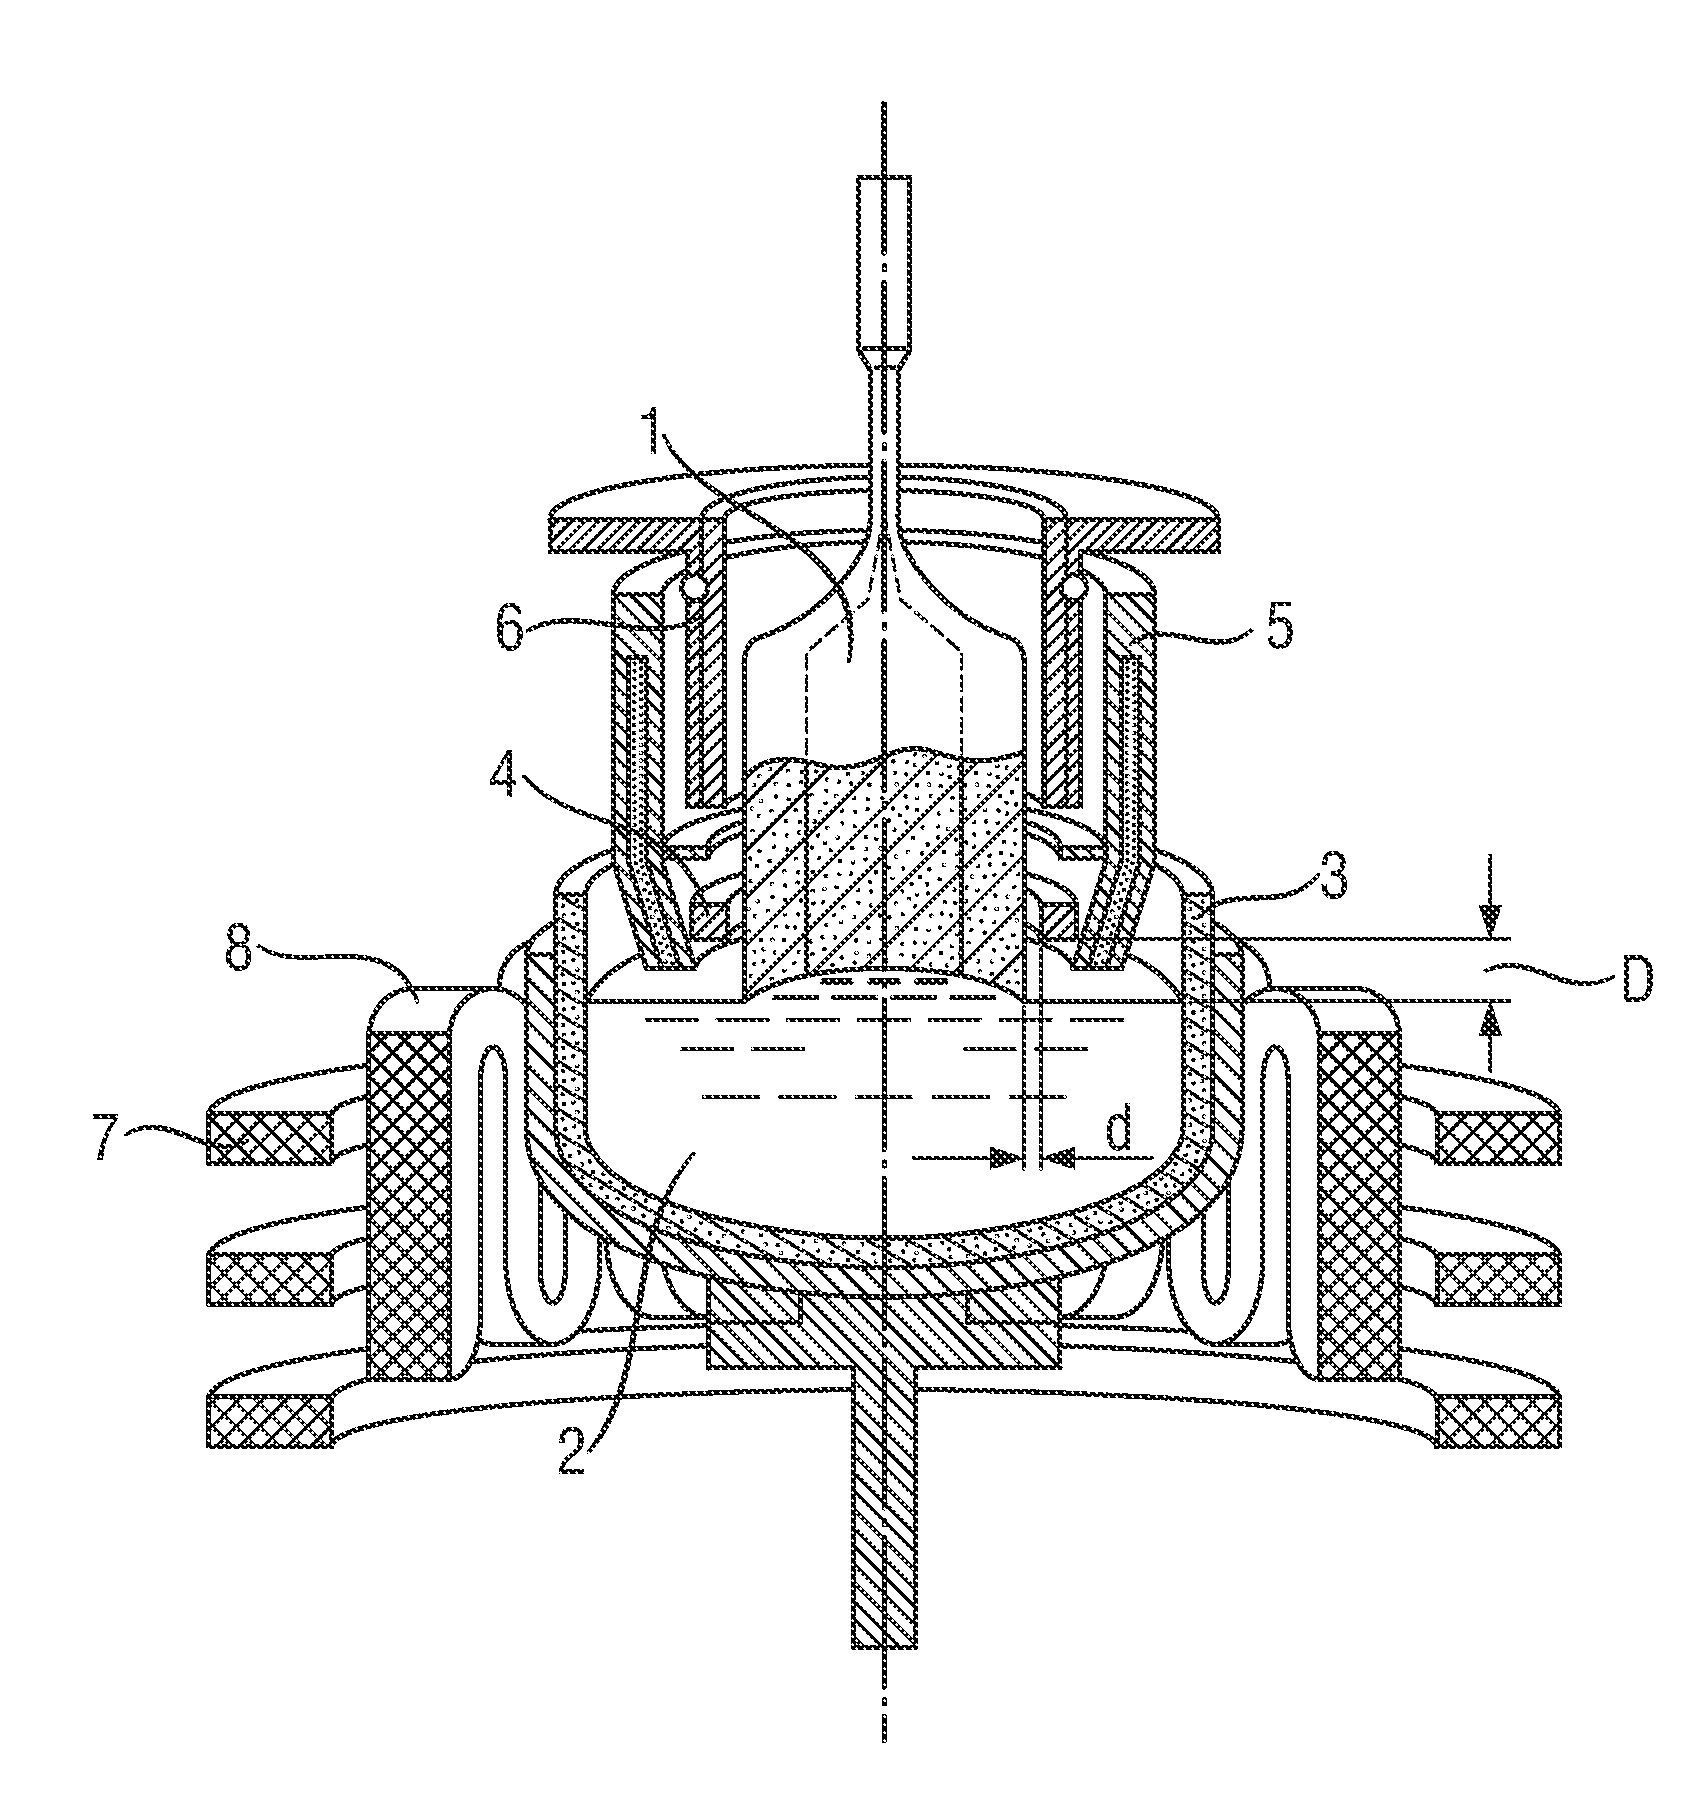 Method For Pulling A Single Crystal Composed Of Silicon With A Section Having A Diameter That Remains Constant